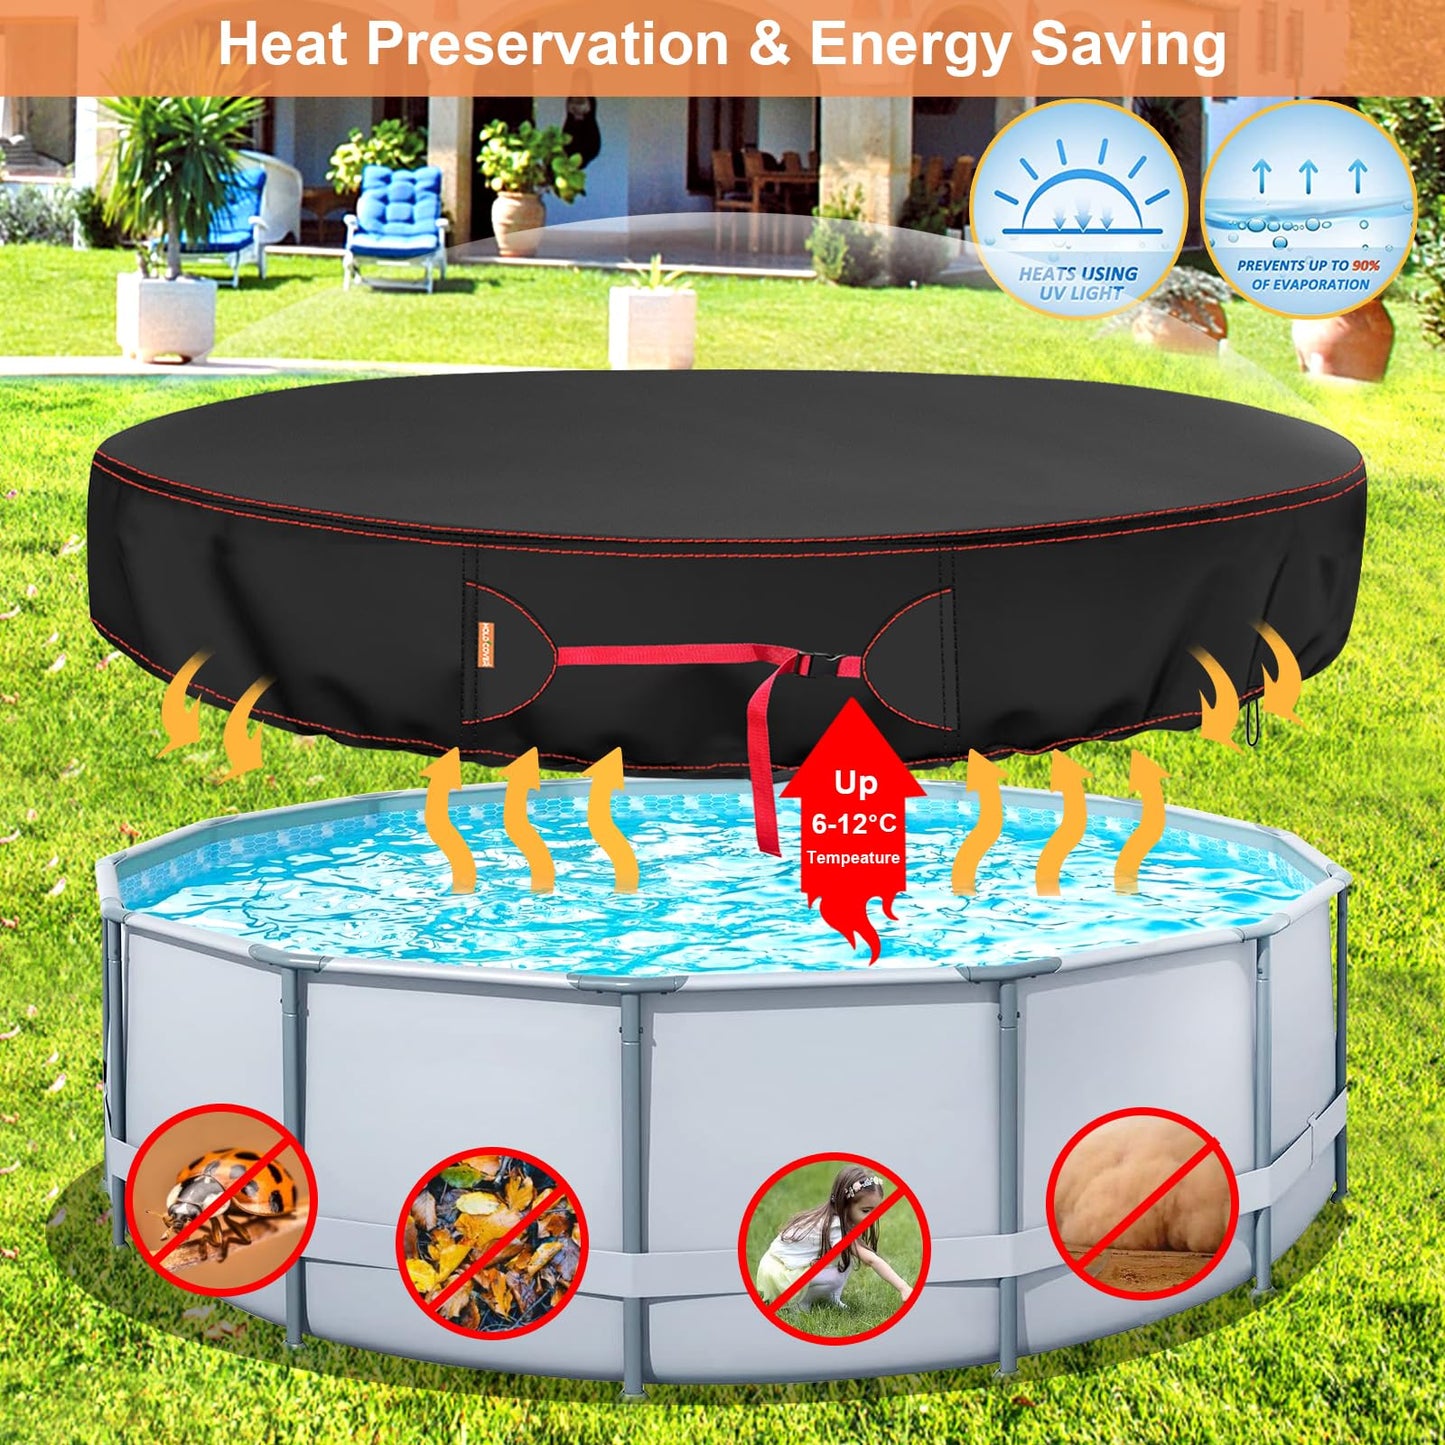 8 Ft Round Pool Cover, Solar Covers for Above Ground Pools, Stock Tank Pool Cover Protector with Pool Cover Accessories, Round Hot Tub Cover Ideal for Waterproof and Dustproof(8Ft)